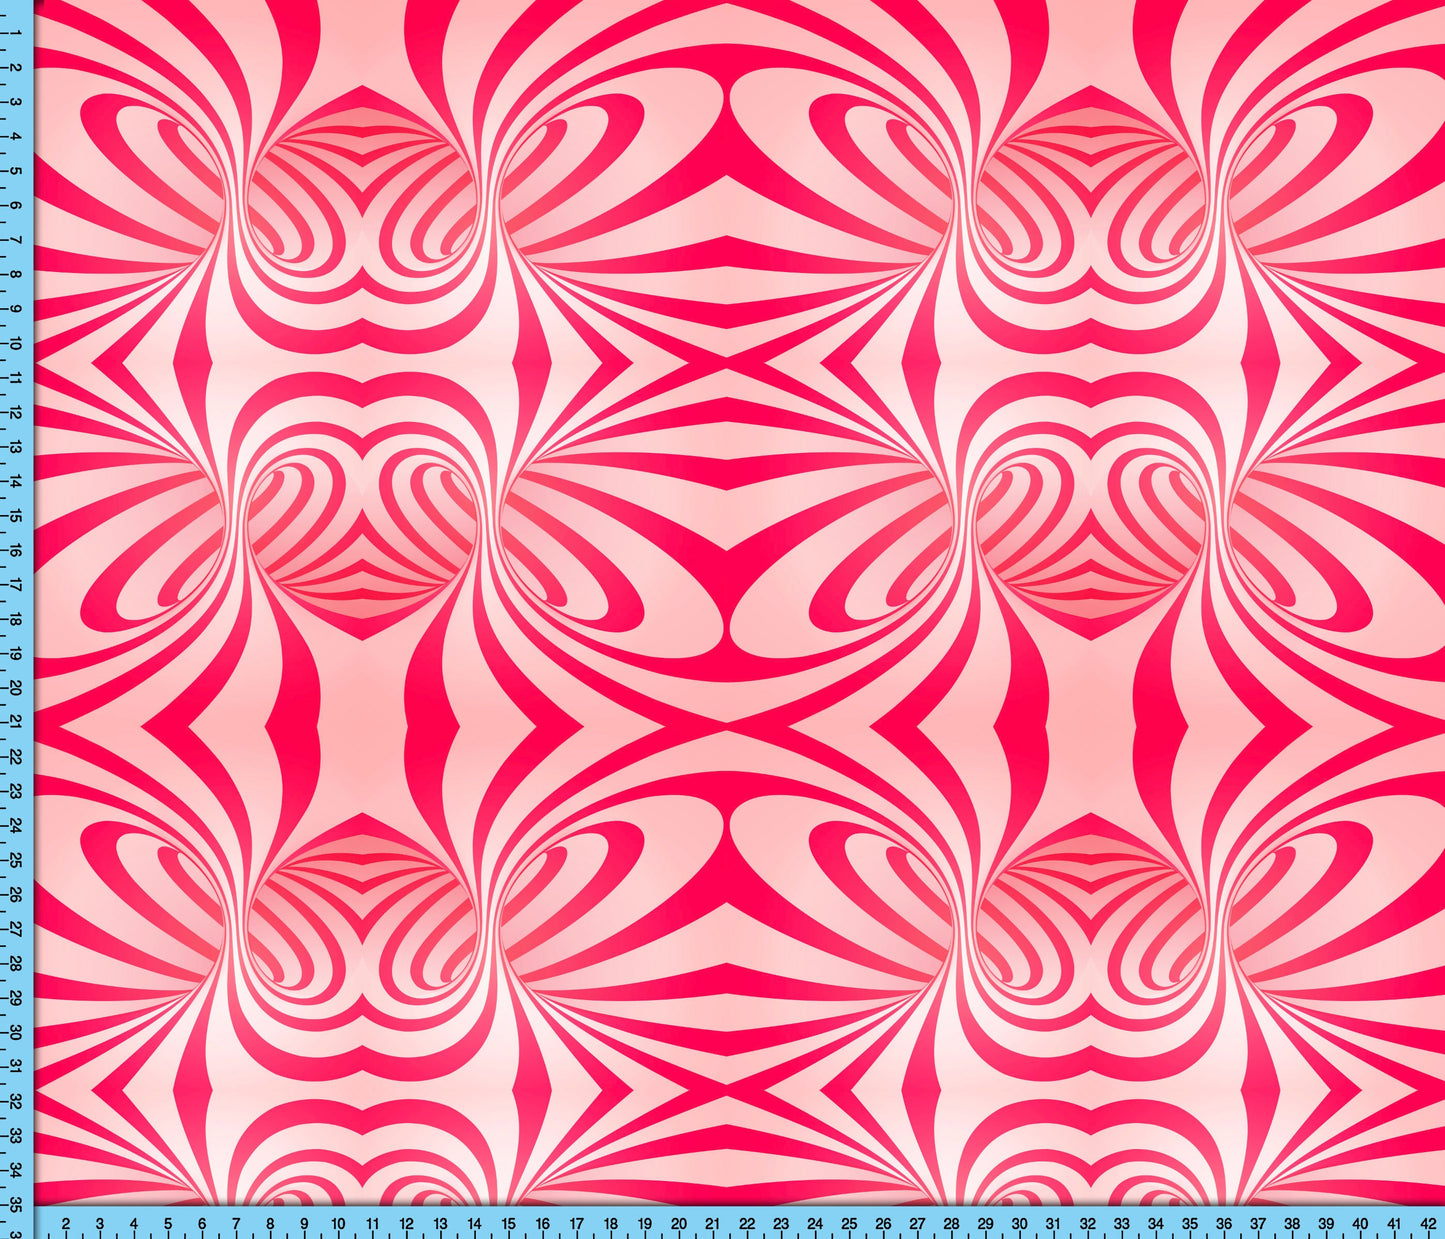 Christmas Candy Cane Fabric Pattern, Spiral OpArt Design Printed By The Yard